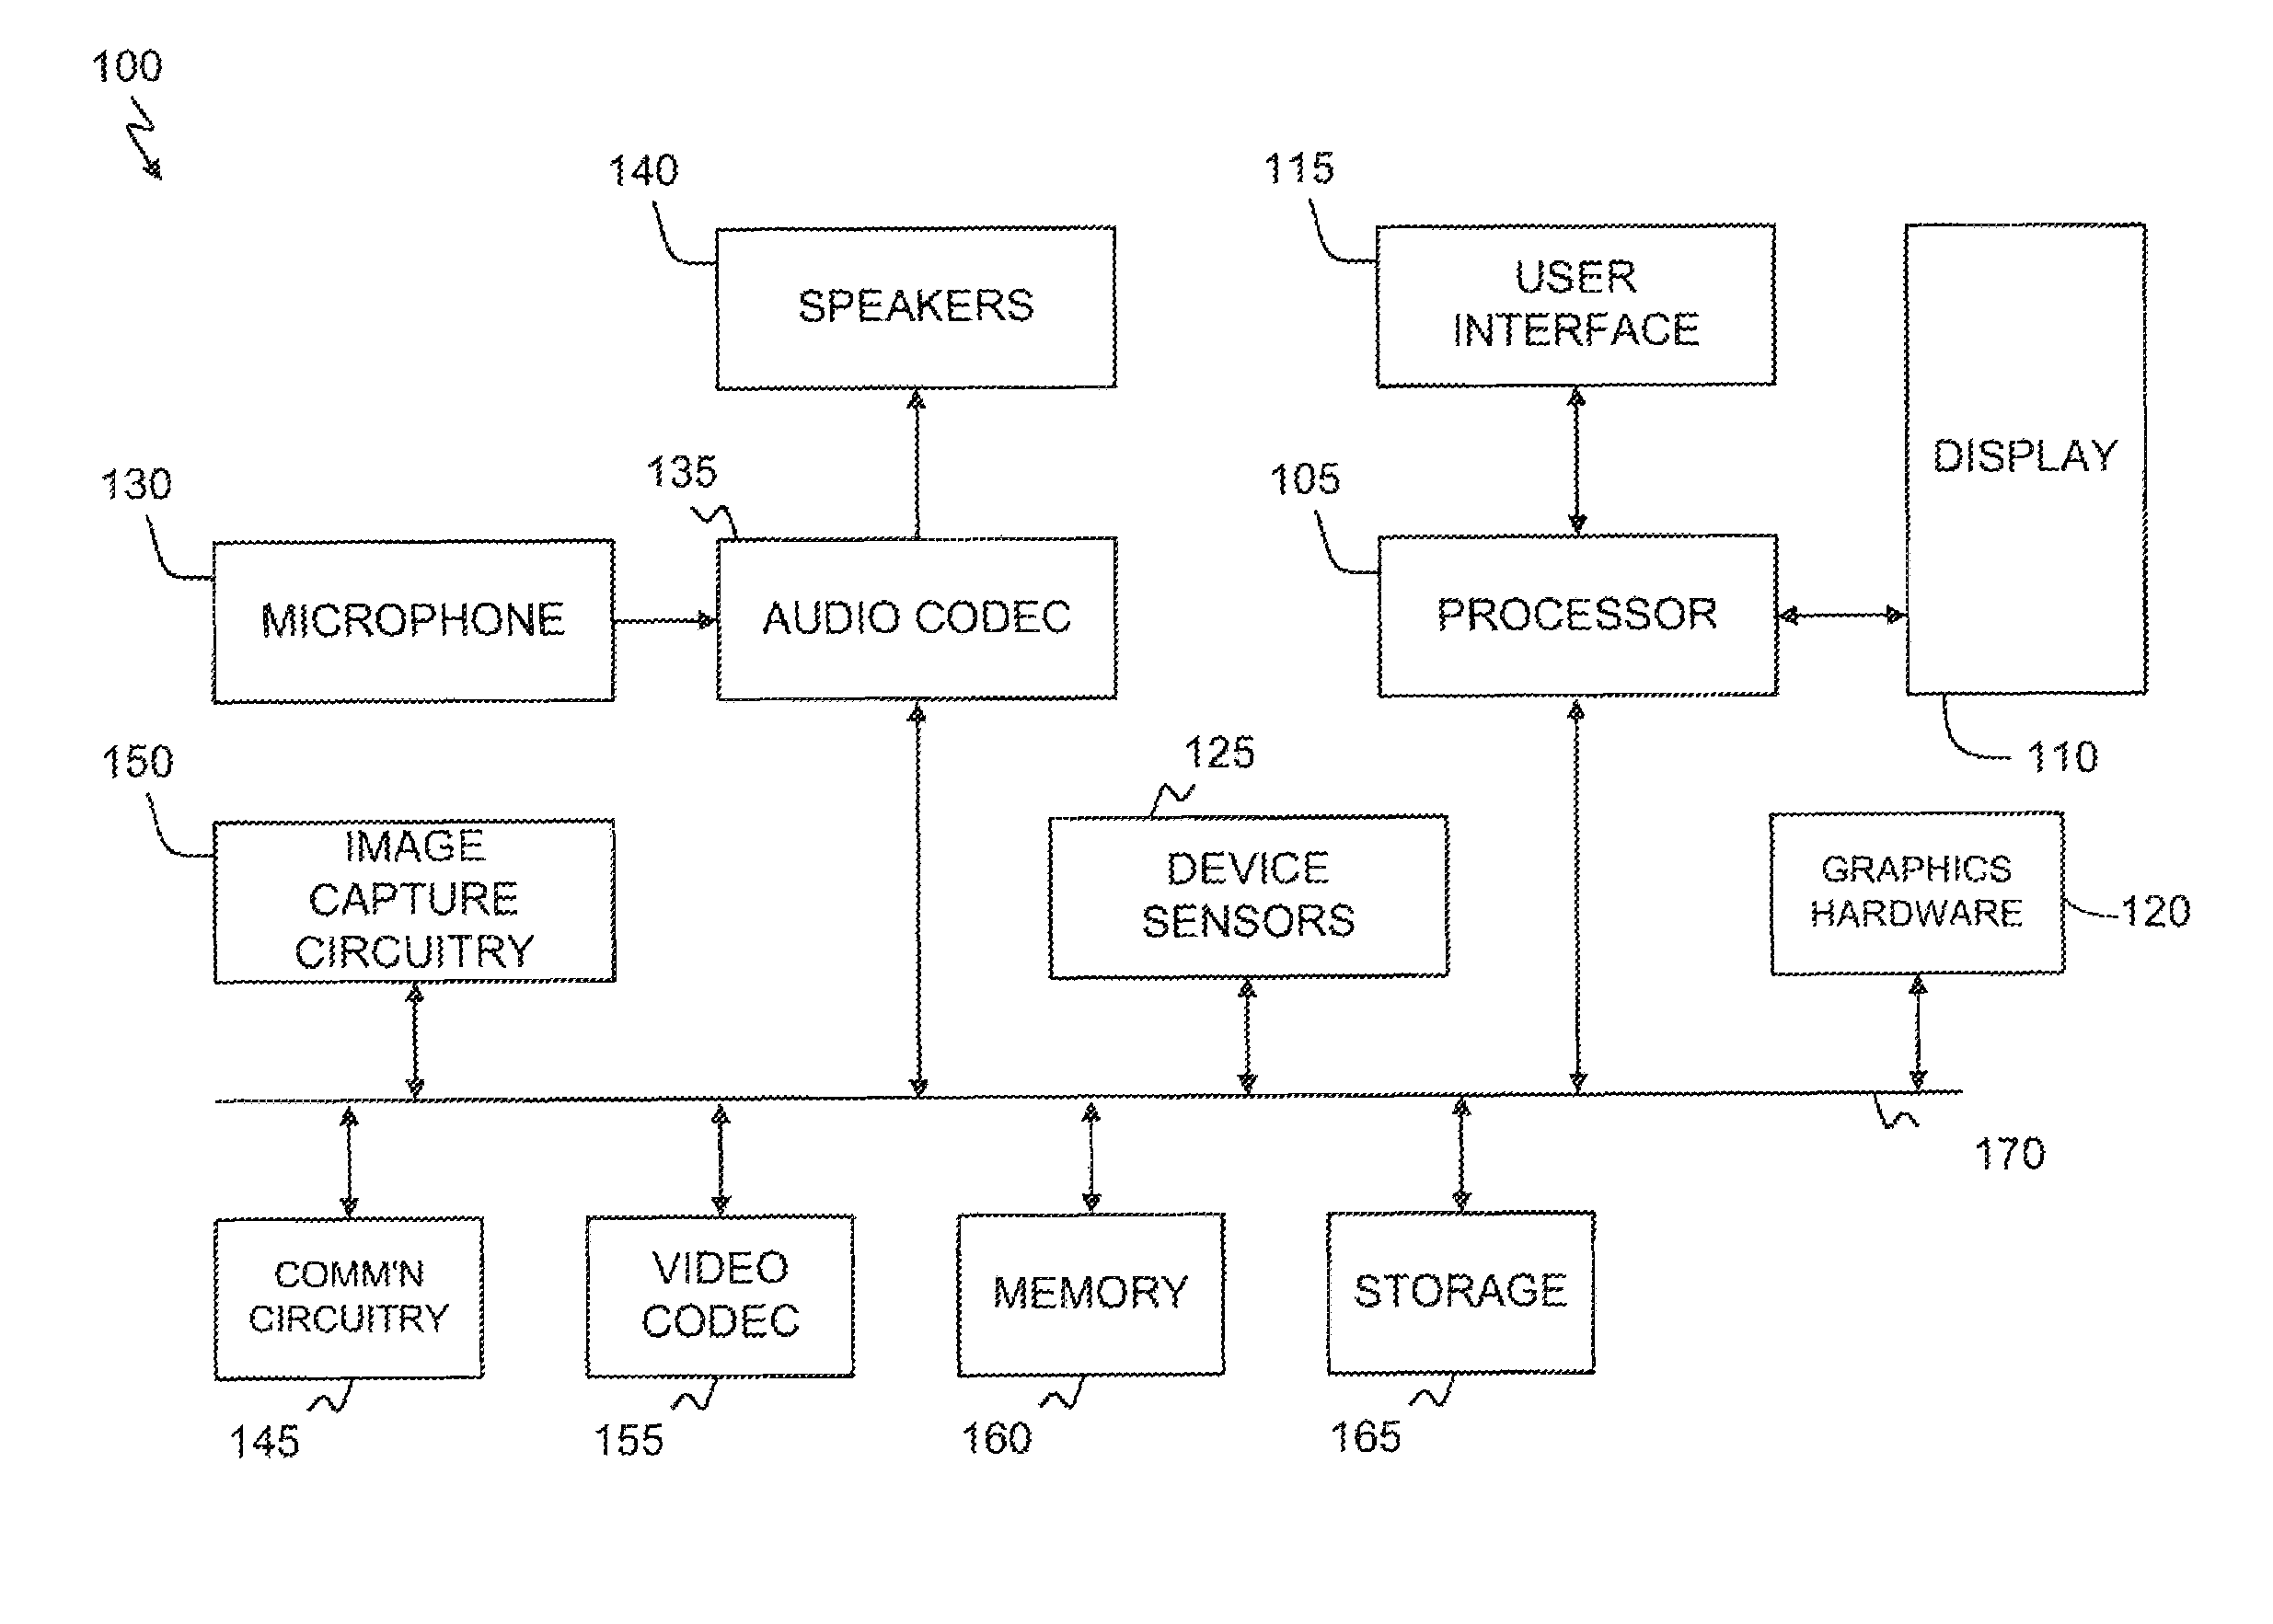 Method and apparatus for automatically adjusting the operation of notifications based on changes in physical activity level